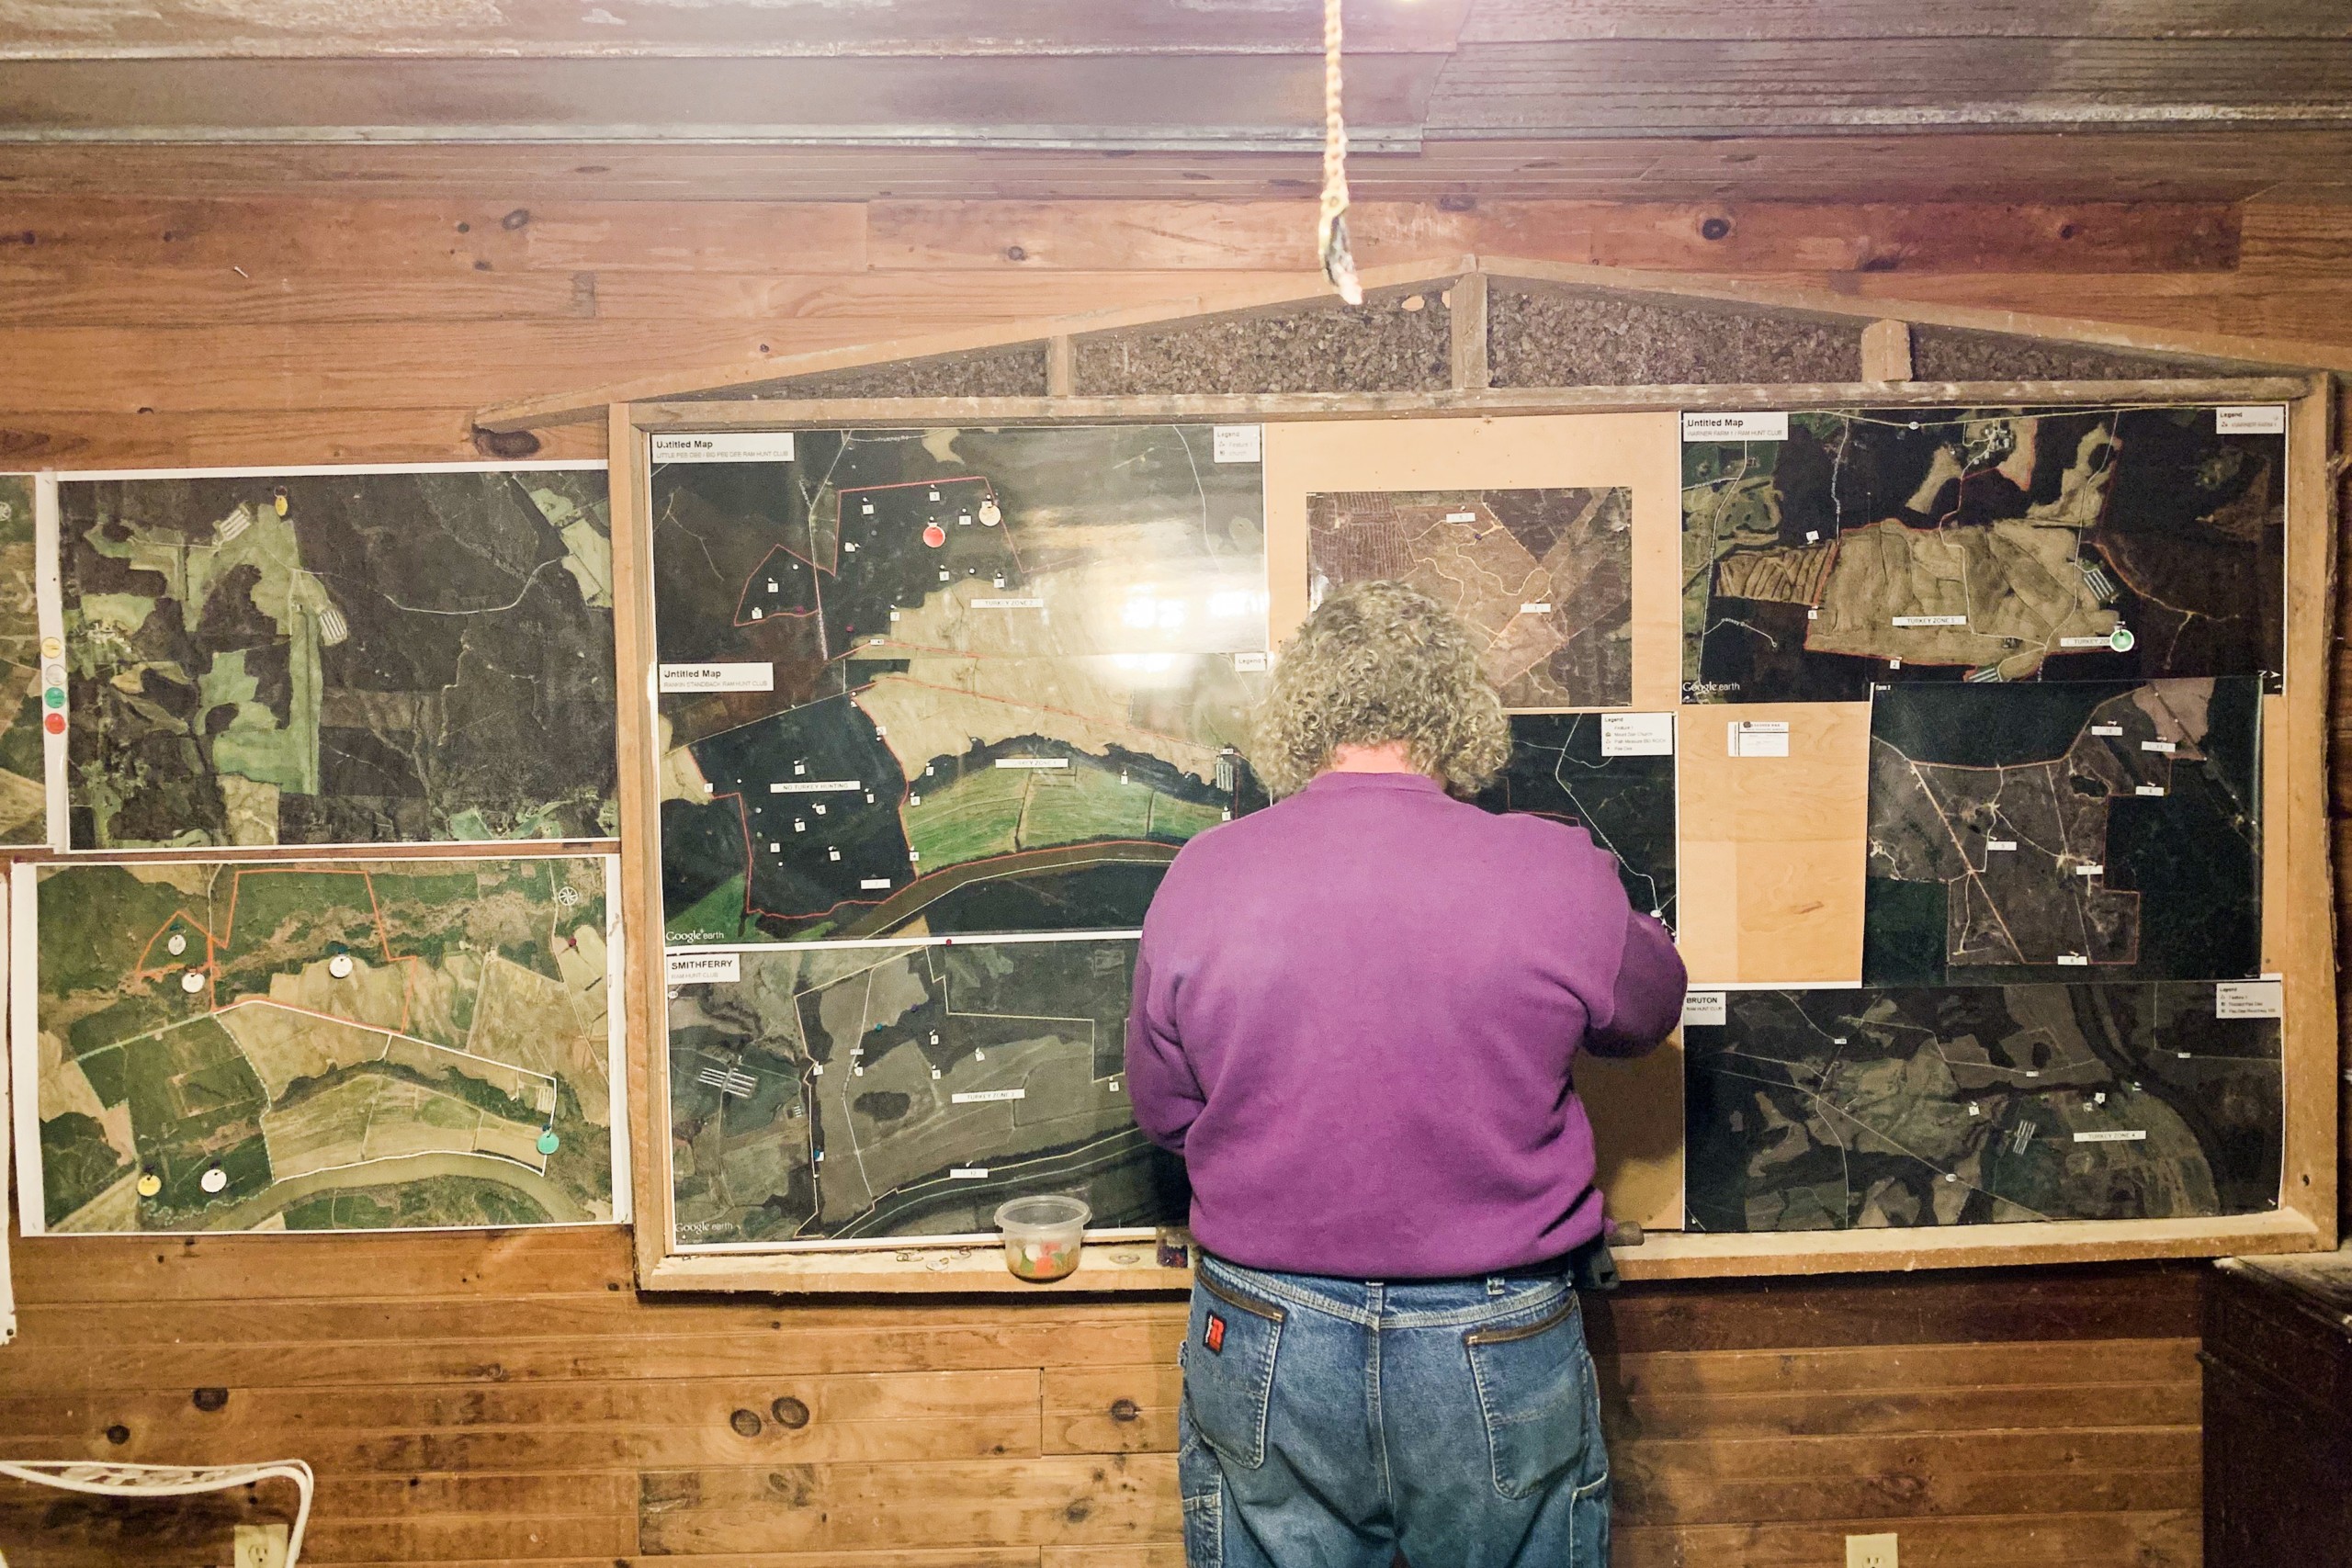 My dad selecting our hunt locations on maps of properties the club leases